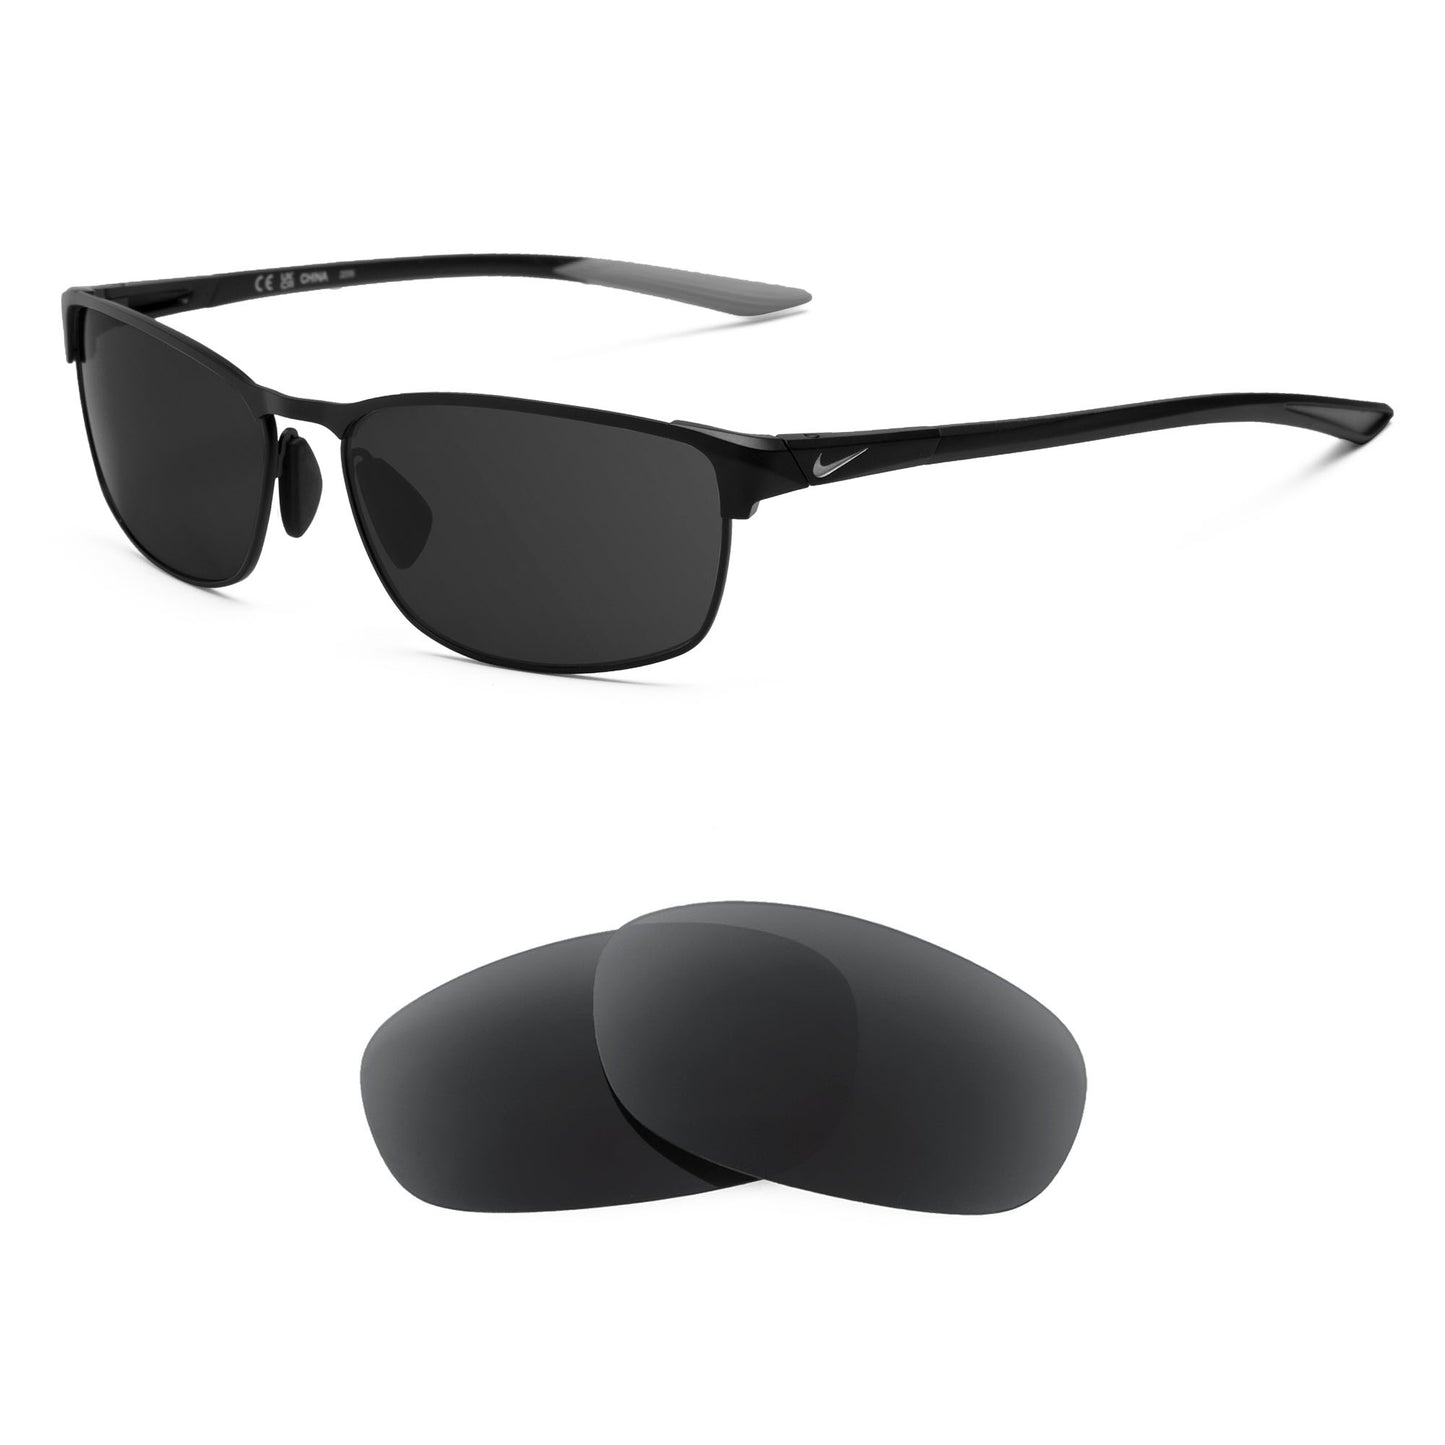 Nike Modern Metal sunglasses with replacement lenses